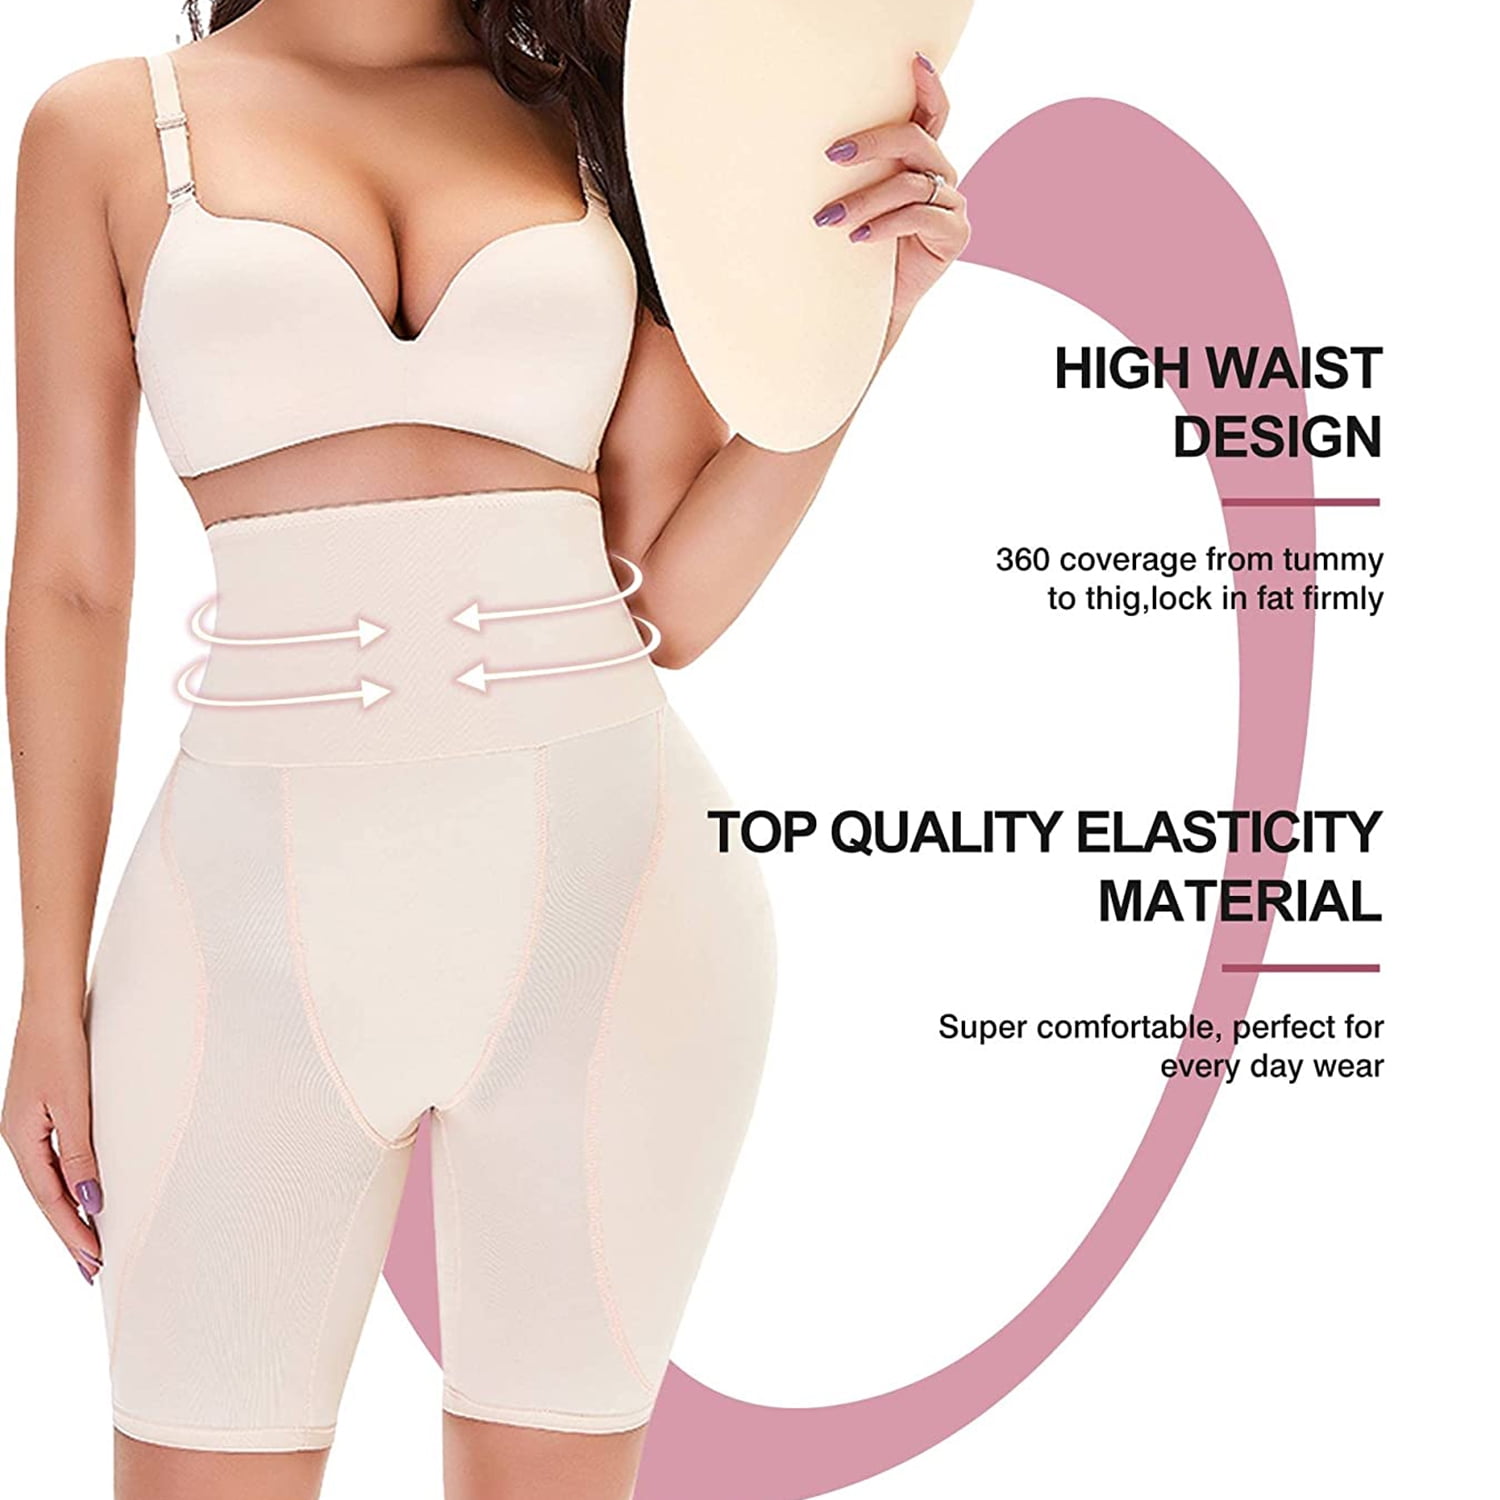 Say goodbye to discomfort and hello to confidence with our #BenchBody  Shapewear! The design of this shapewear includes a high waist givi